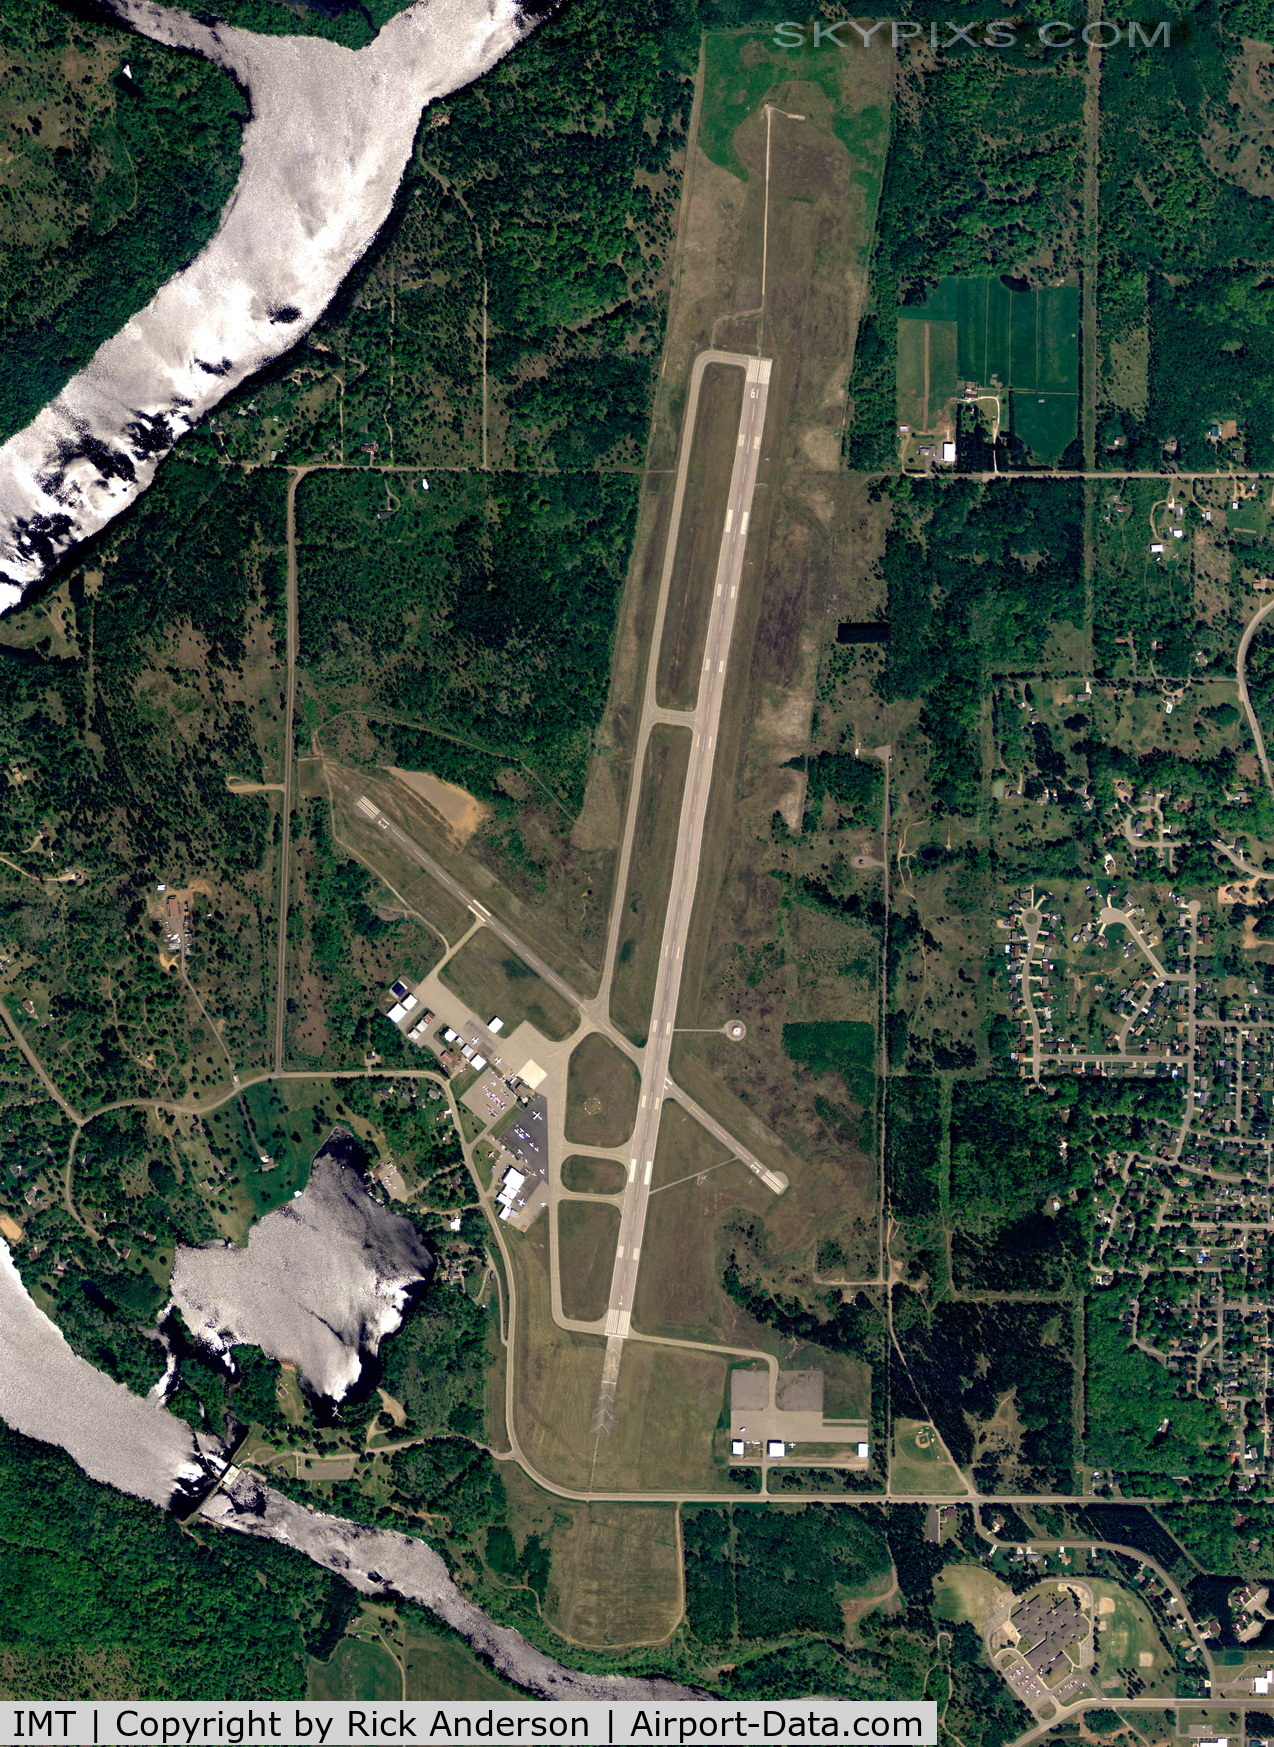 Ford Airport (IMT) - IMT-Ford Airport Iron Mountain